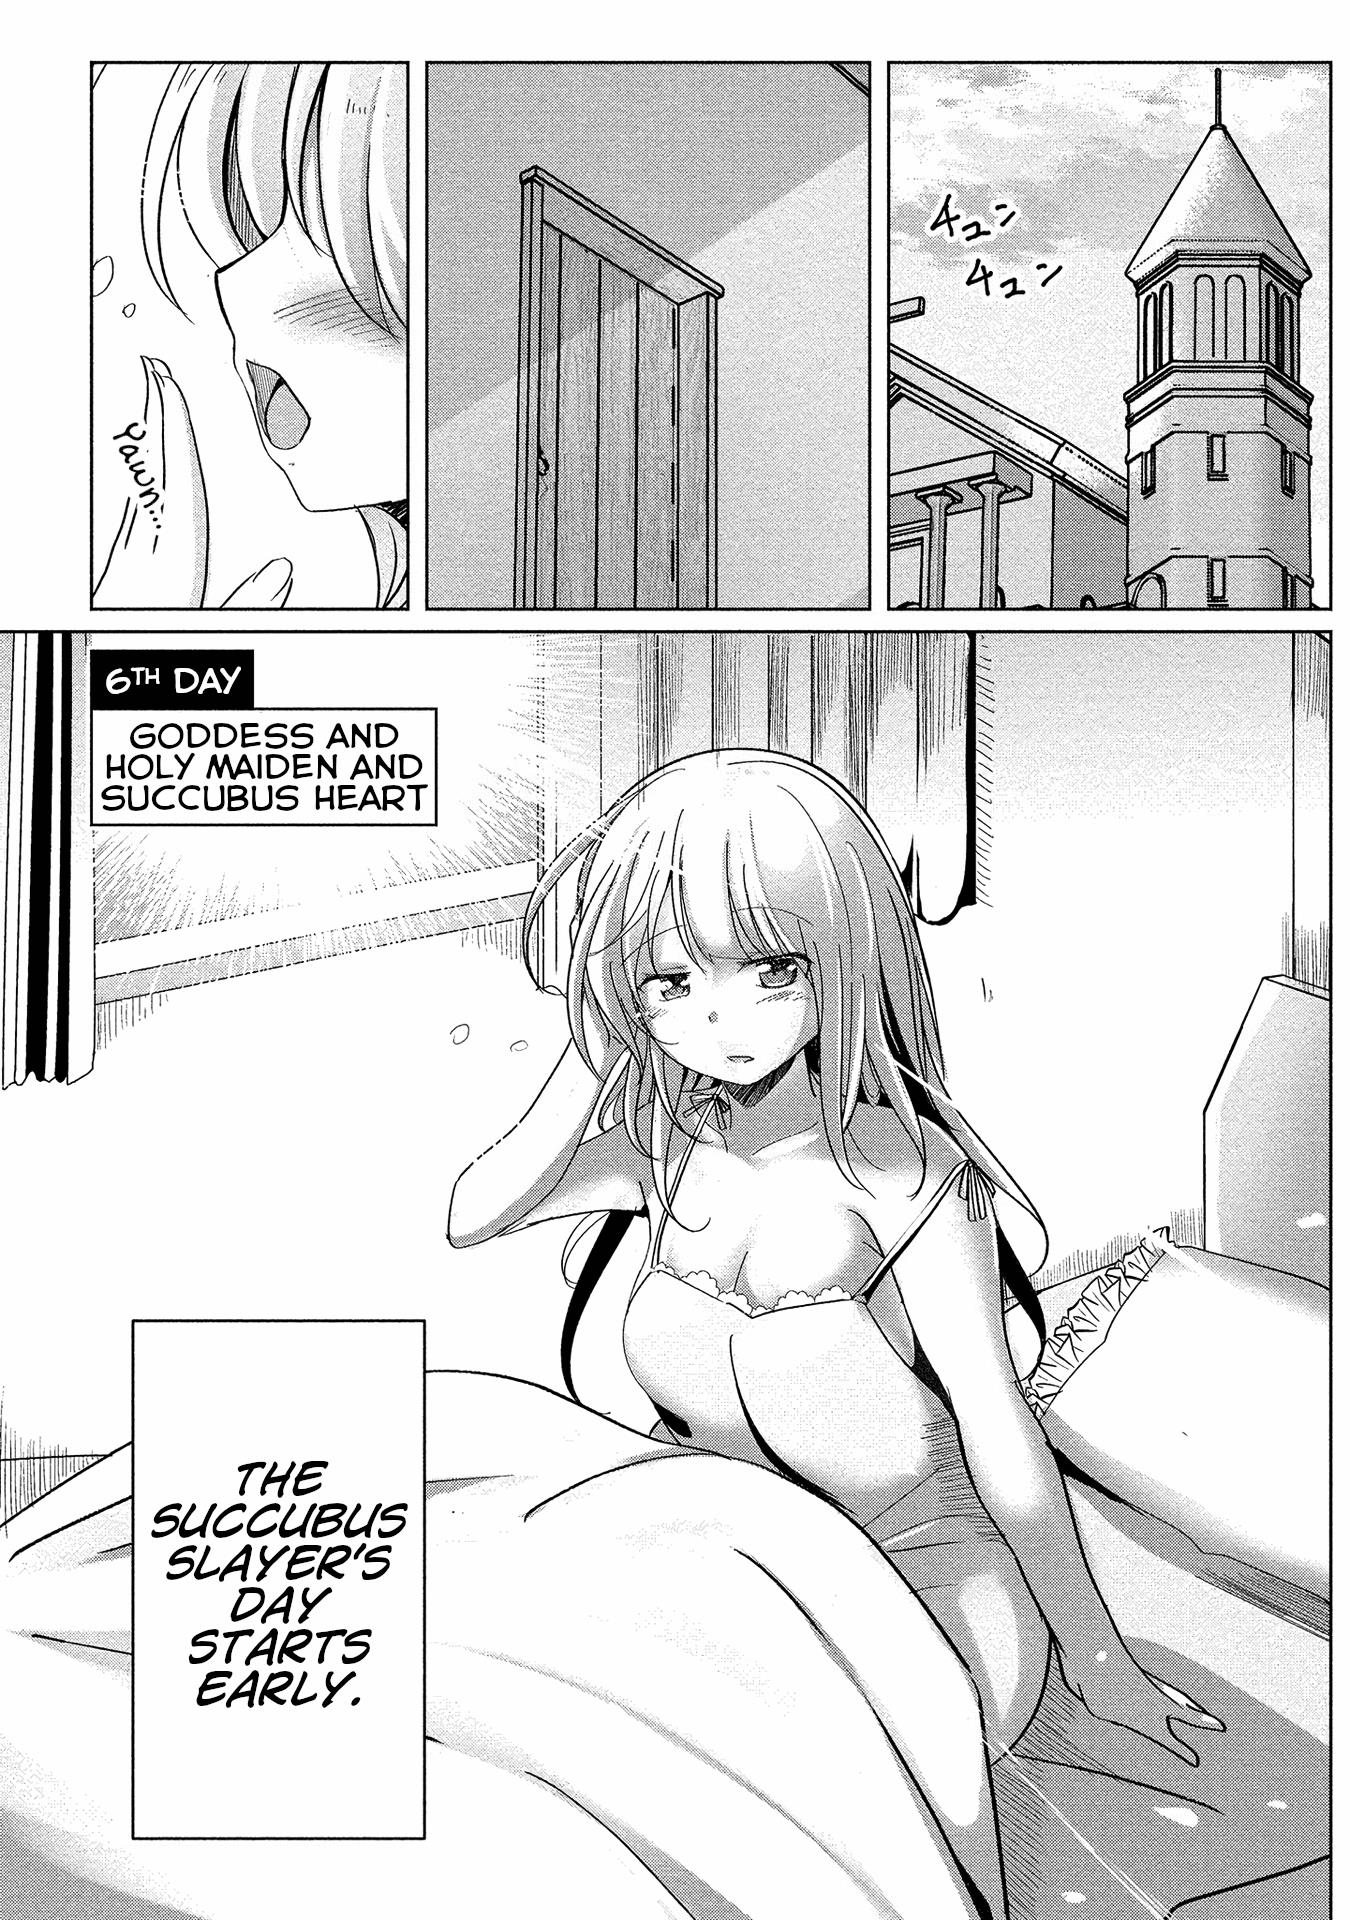 Dunking On Succubi In Another World - Page 1